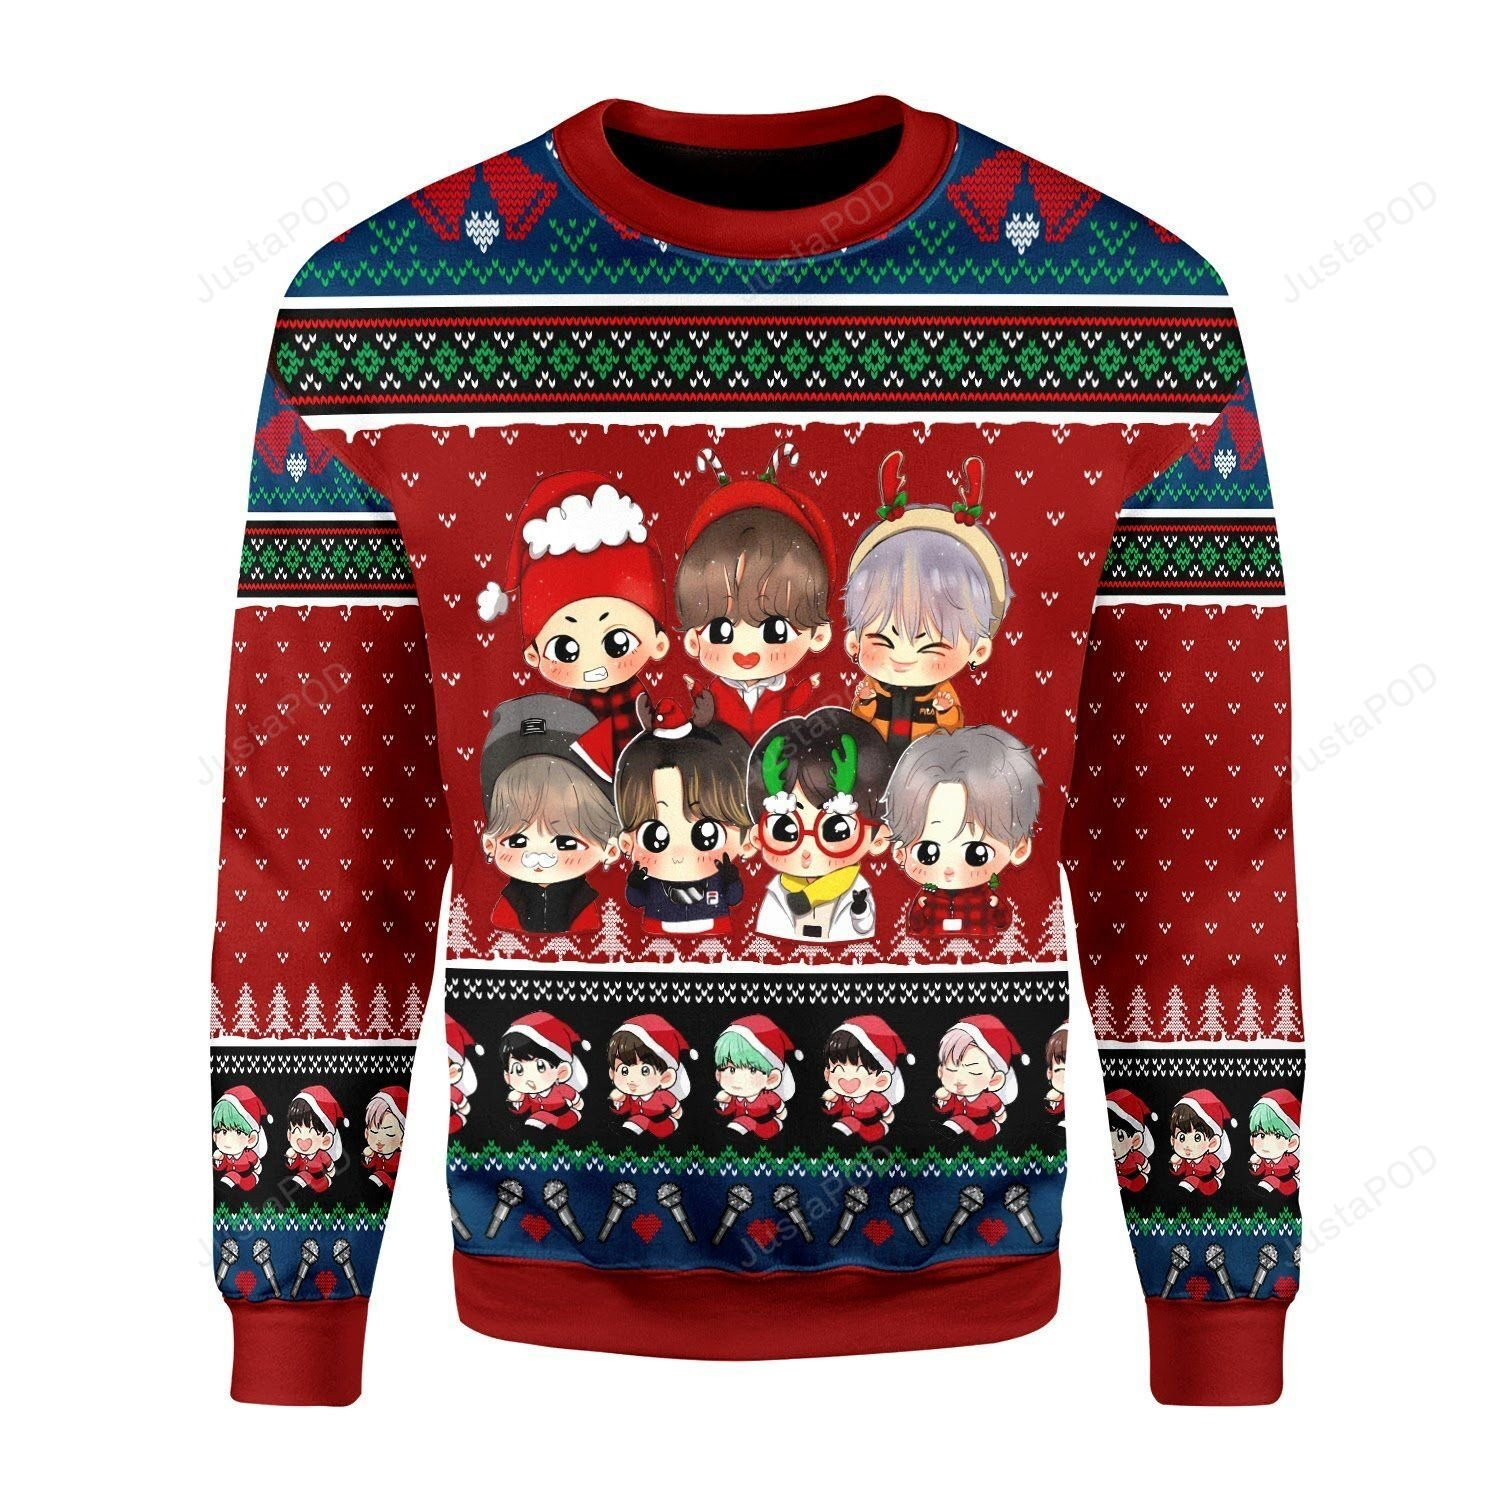 BTS Christmas Ugly Sweater Ugly Sweater Christmas Sweaters Hoodie Sweater